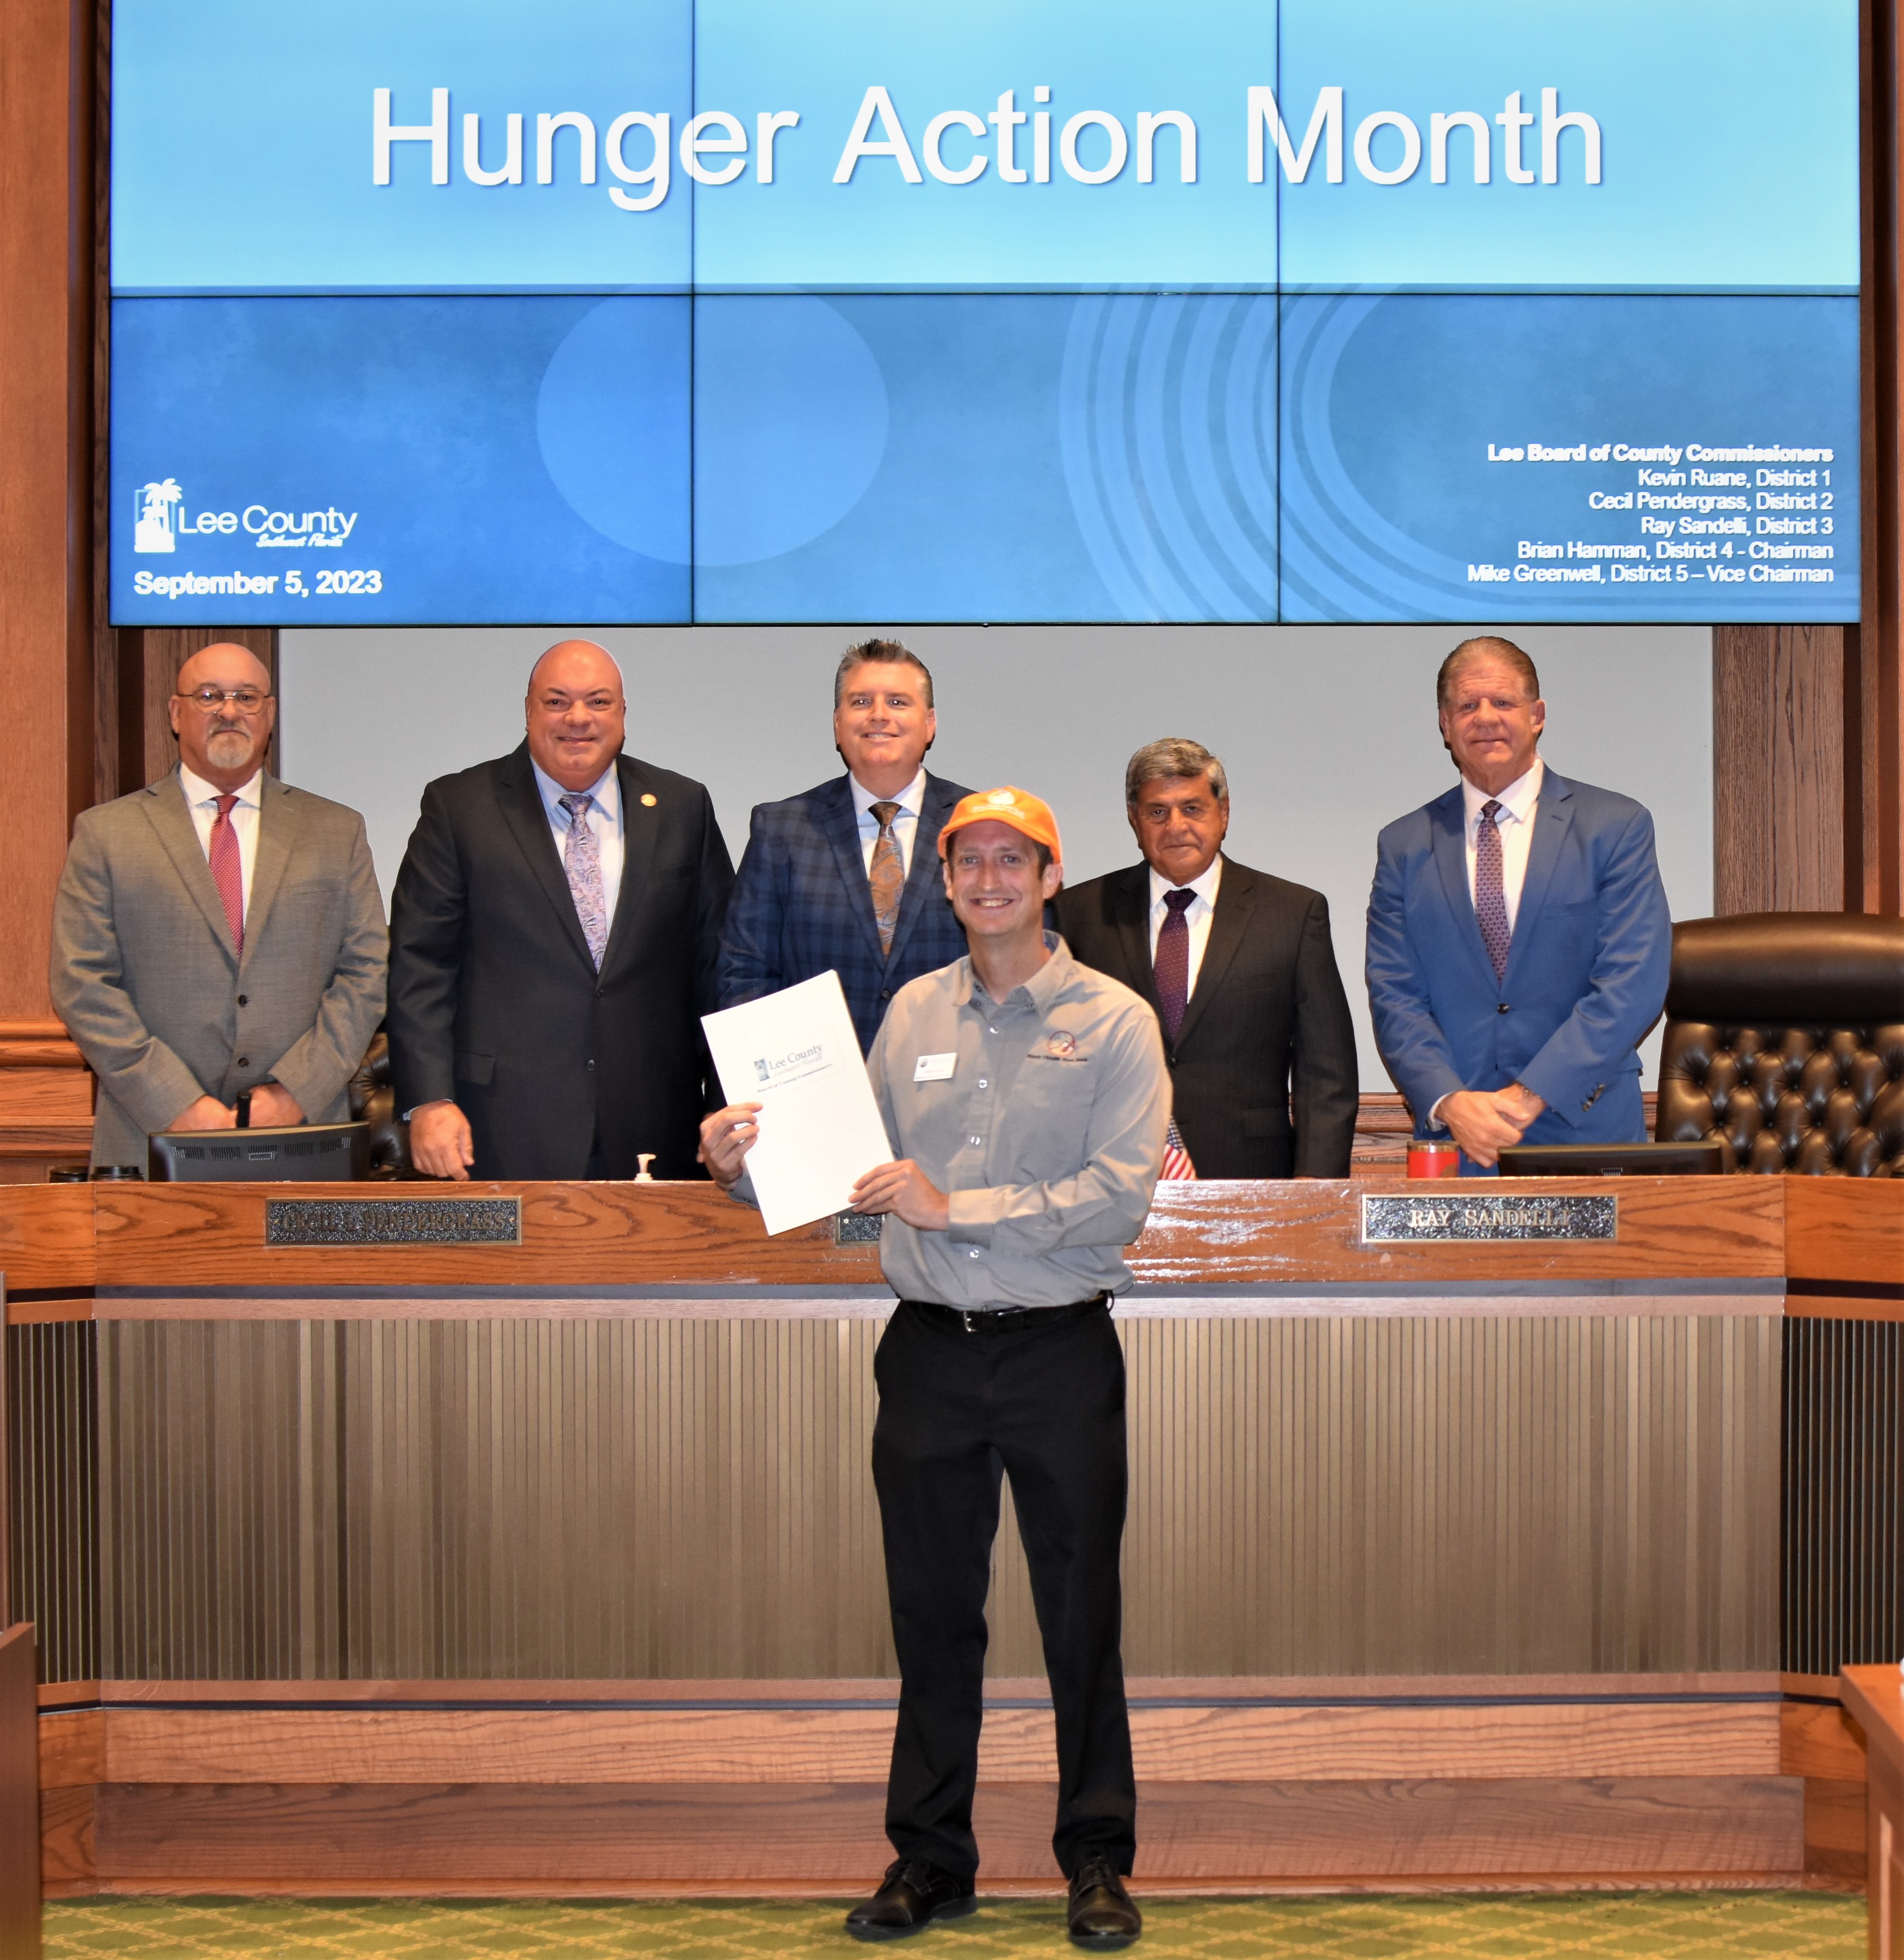 09-05-23 Hunger Action Month